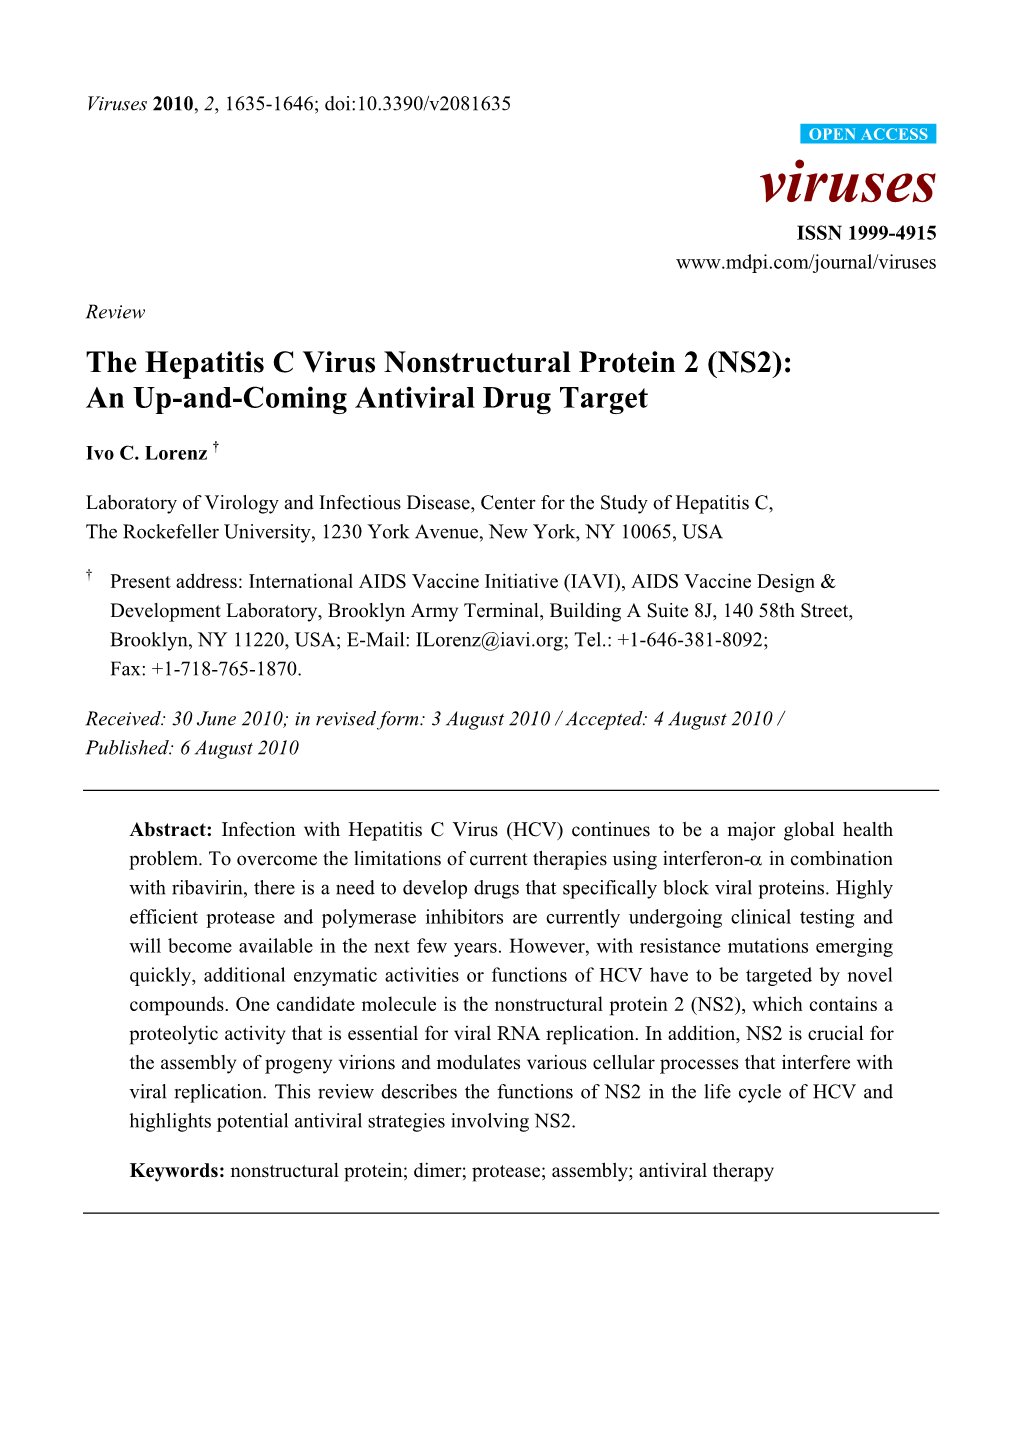 The Hepatitis C Virus Nonstructural Protein 2 (NS2): an Up-And-Coming Antiviral Drug Target